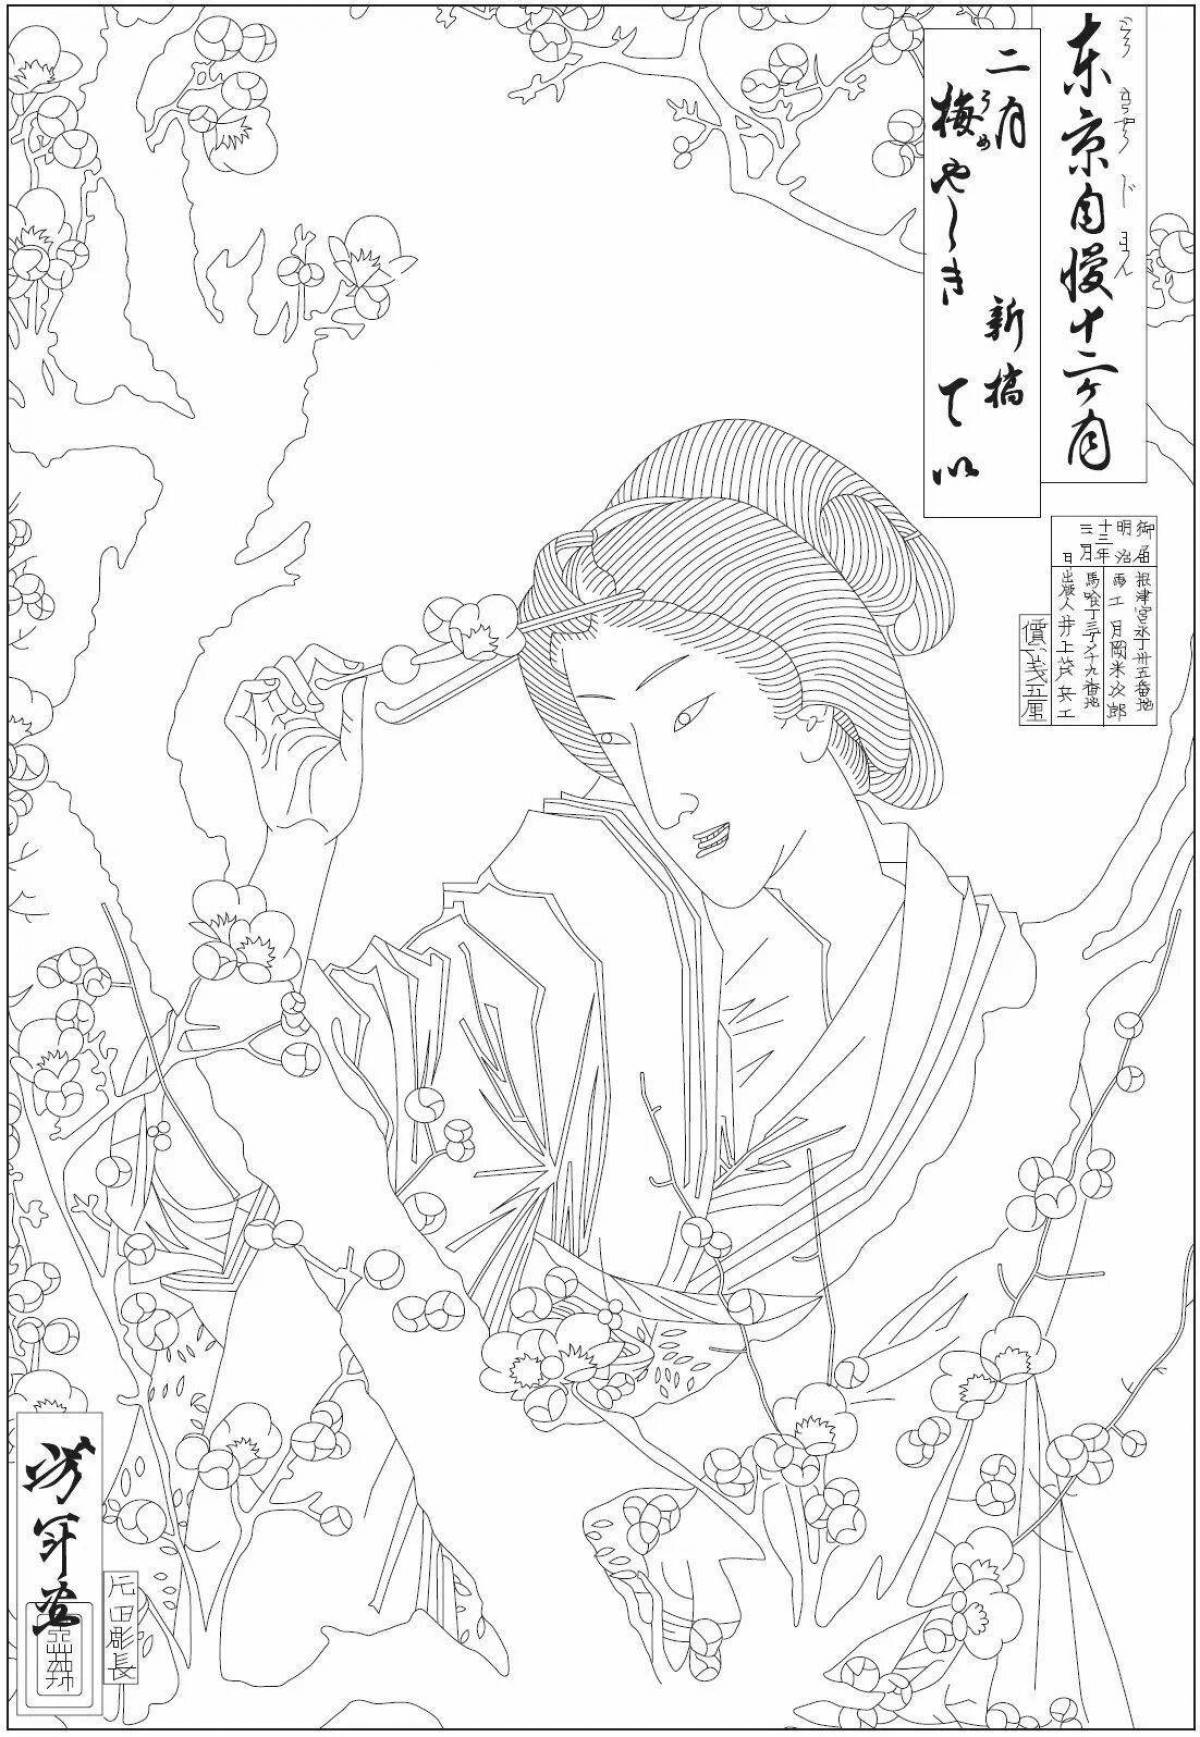 Coloring page with intricate Japanese motif